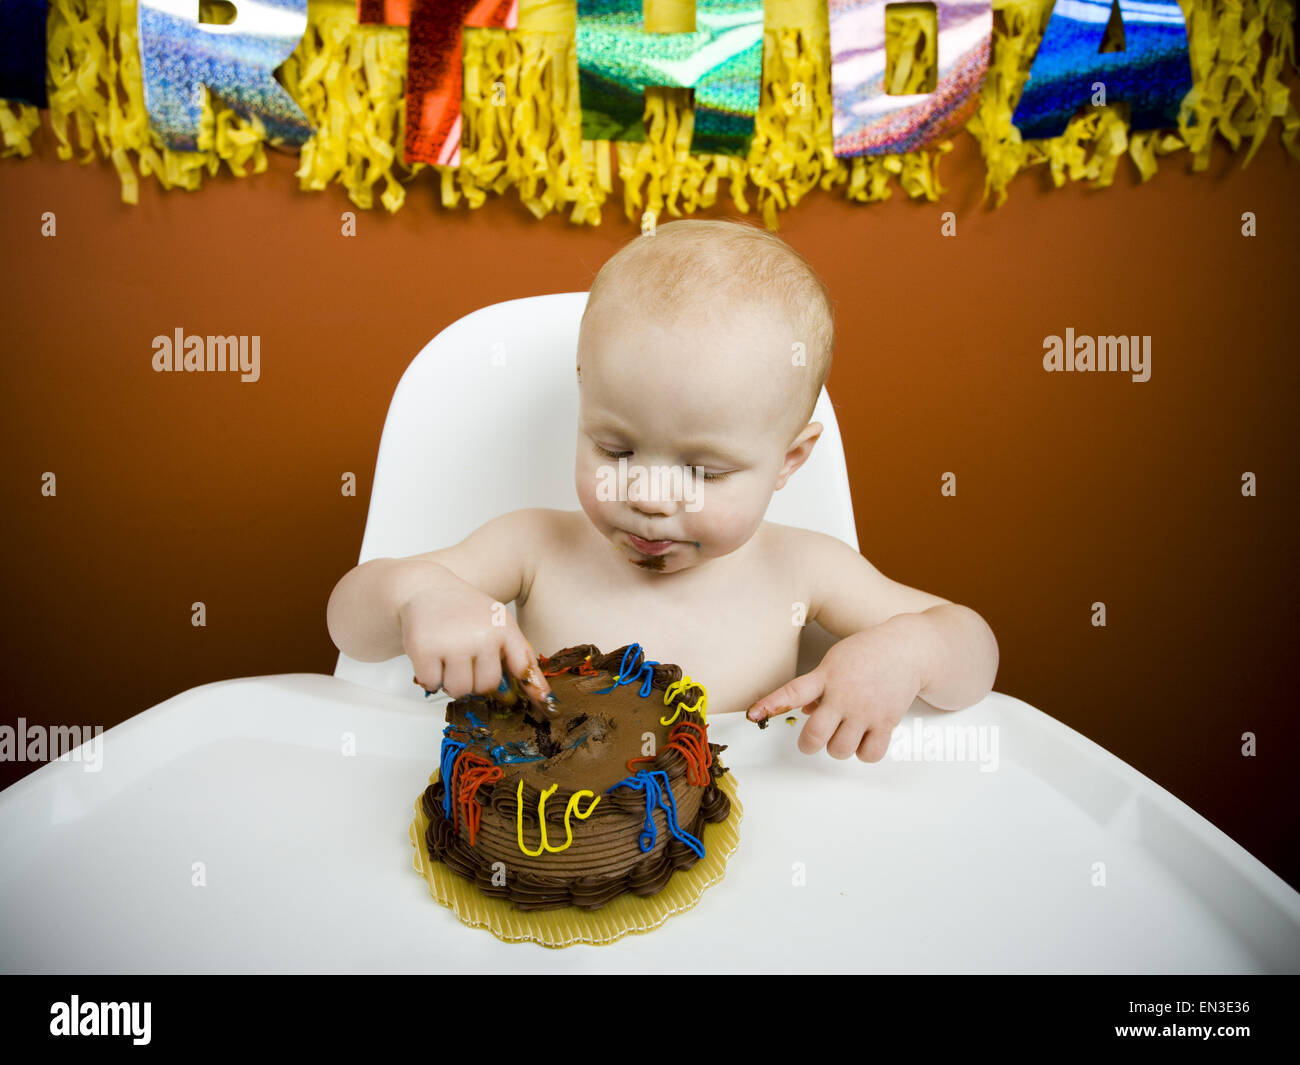 Baby eating cake Banque D'Images